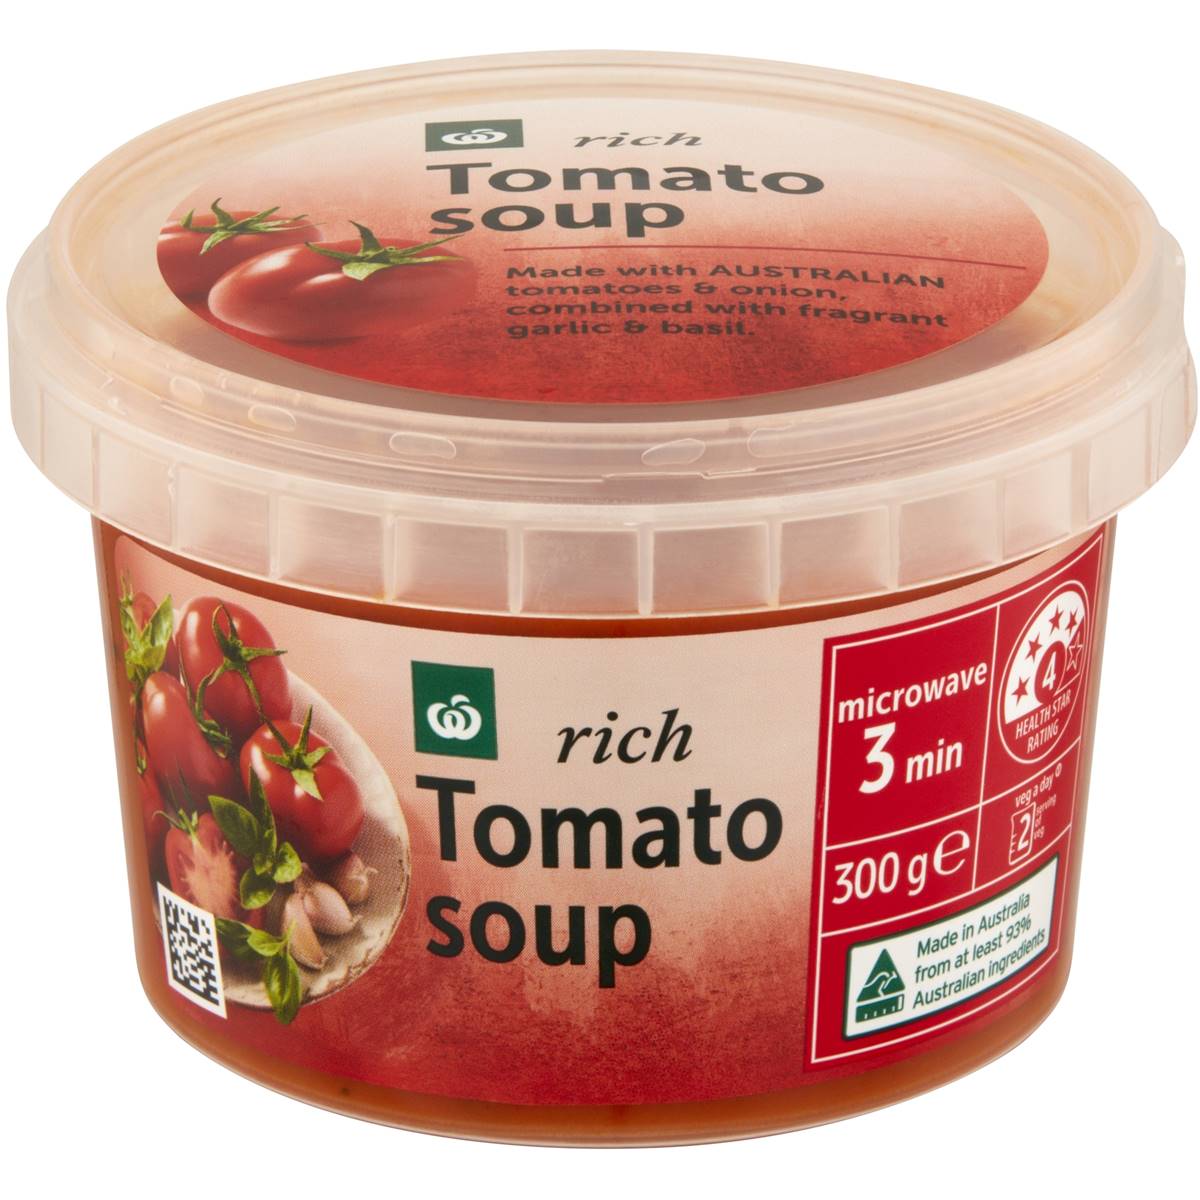 Calories in Woolworths Tomato Soup